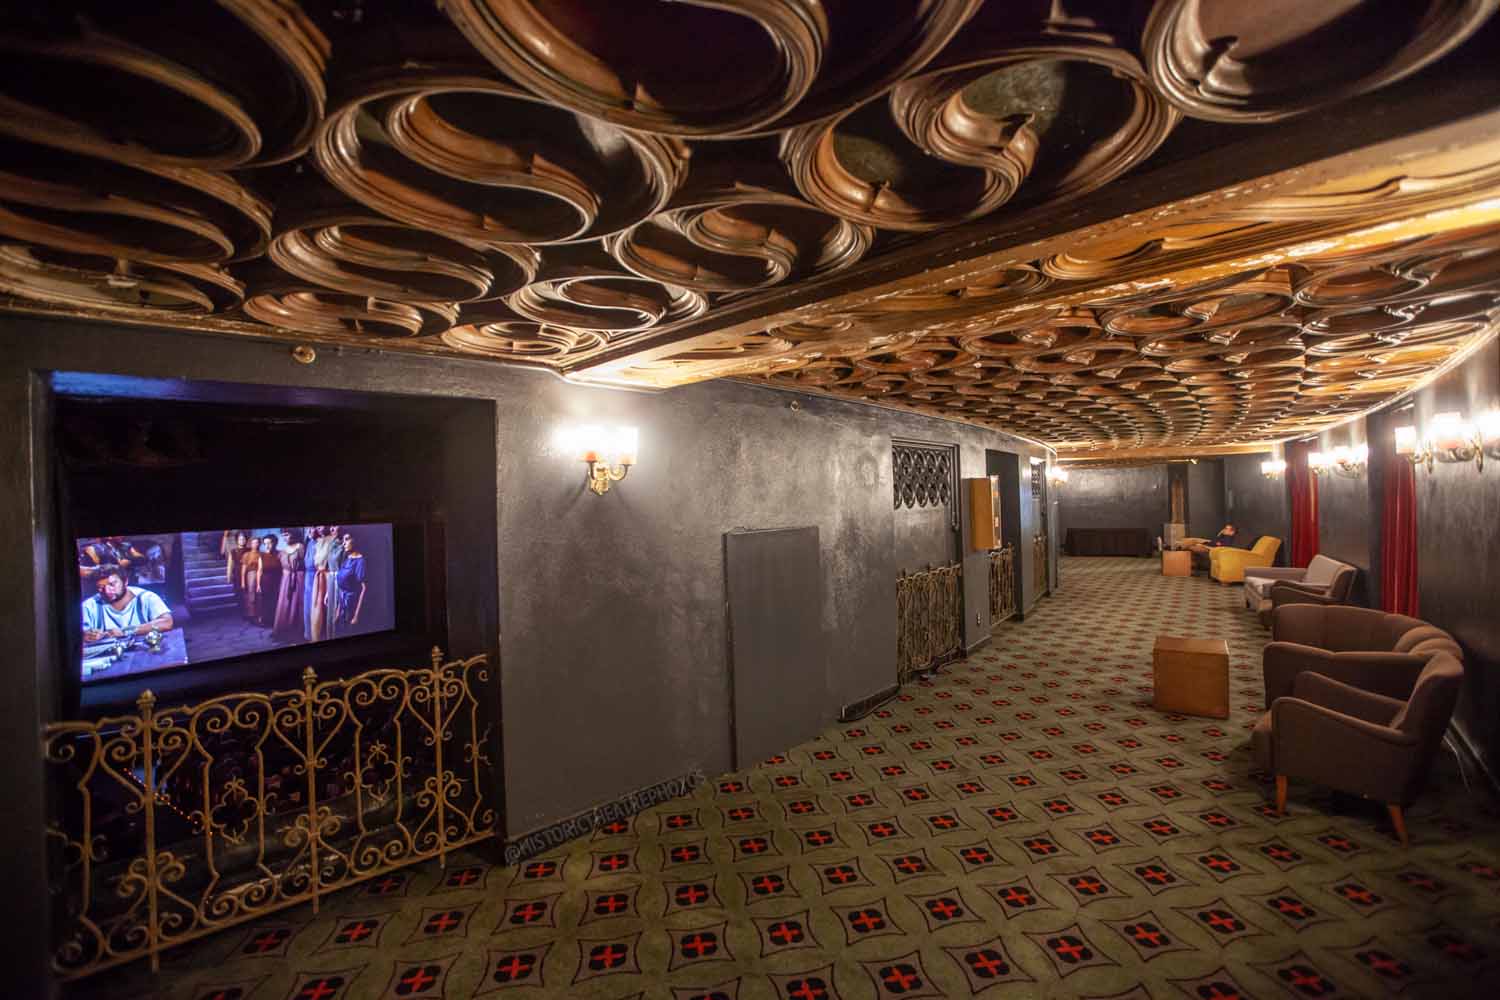 The United Theater on Broadway, Los Angeles, Los Angeles: Downtown: Mezzanine Corridor with Movie Screening